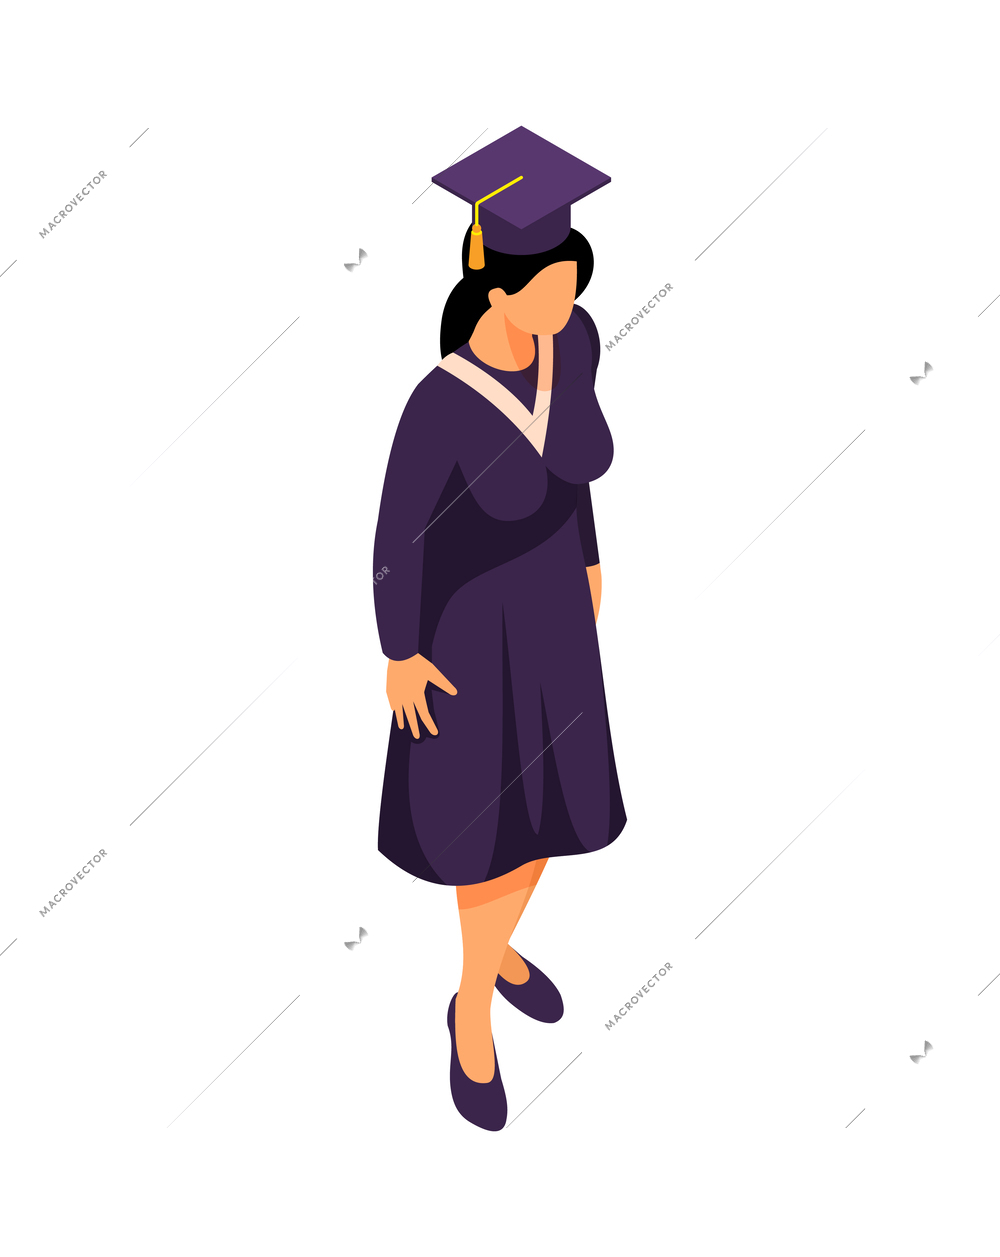 Female university graduate wearing cap and mantle isometric character 3d vector illustration